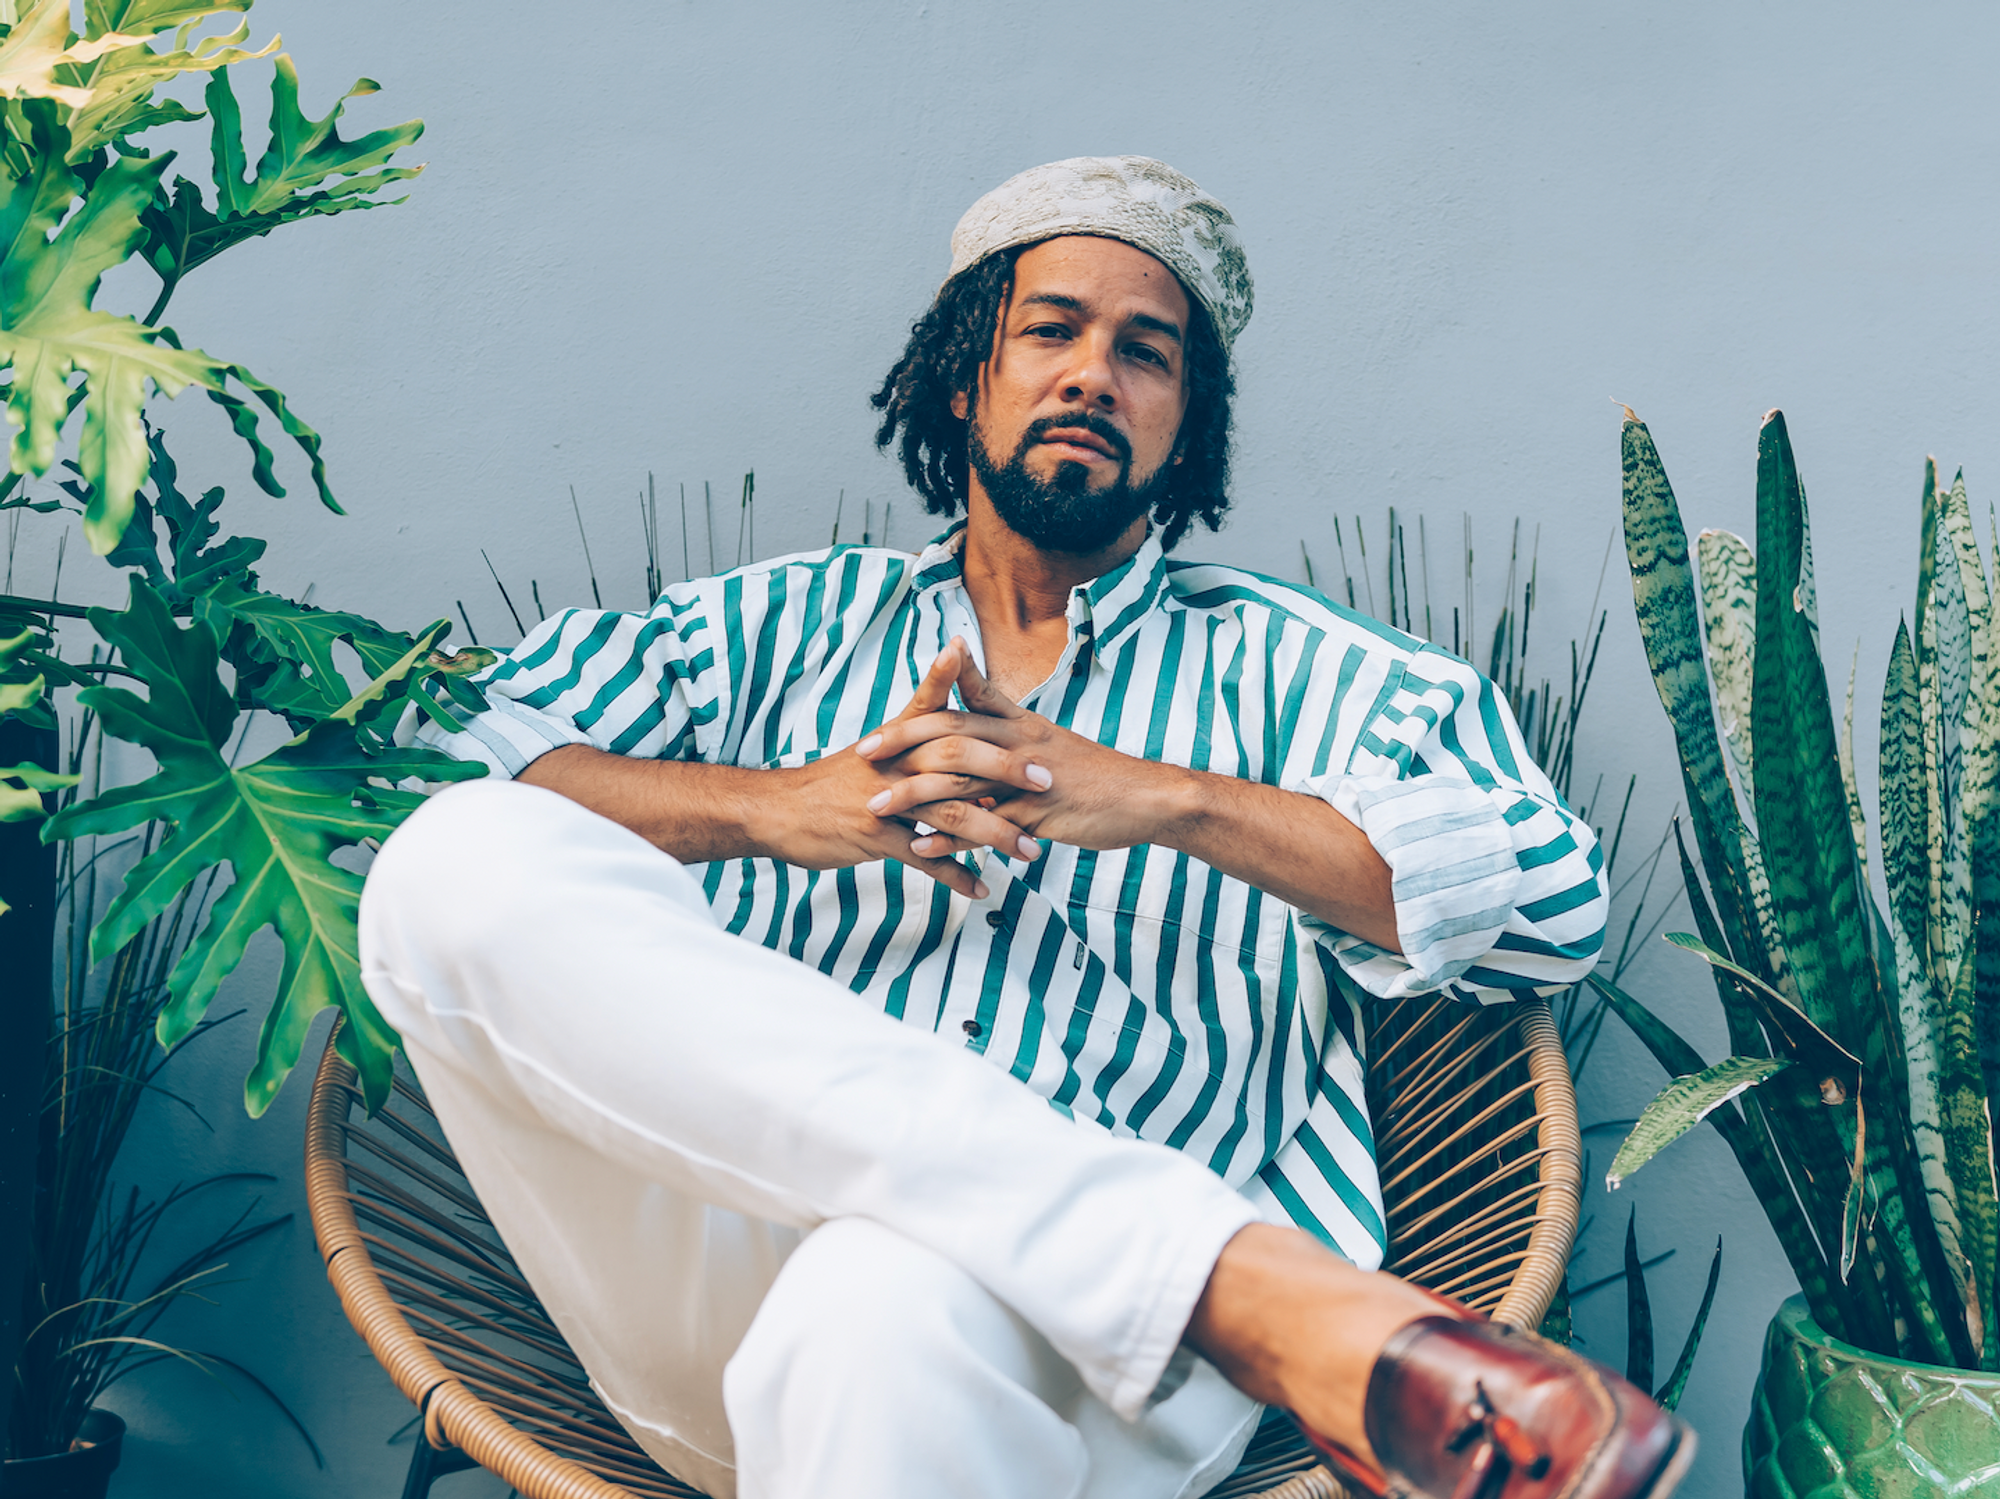 Kes & J Perry's 'Liki Tiki' Could Be Your New Summer Anthem